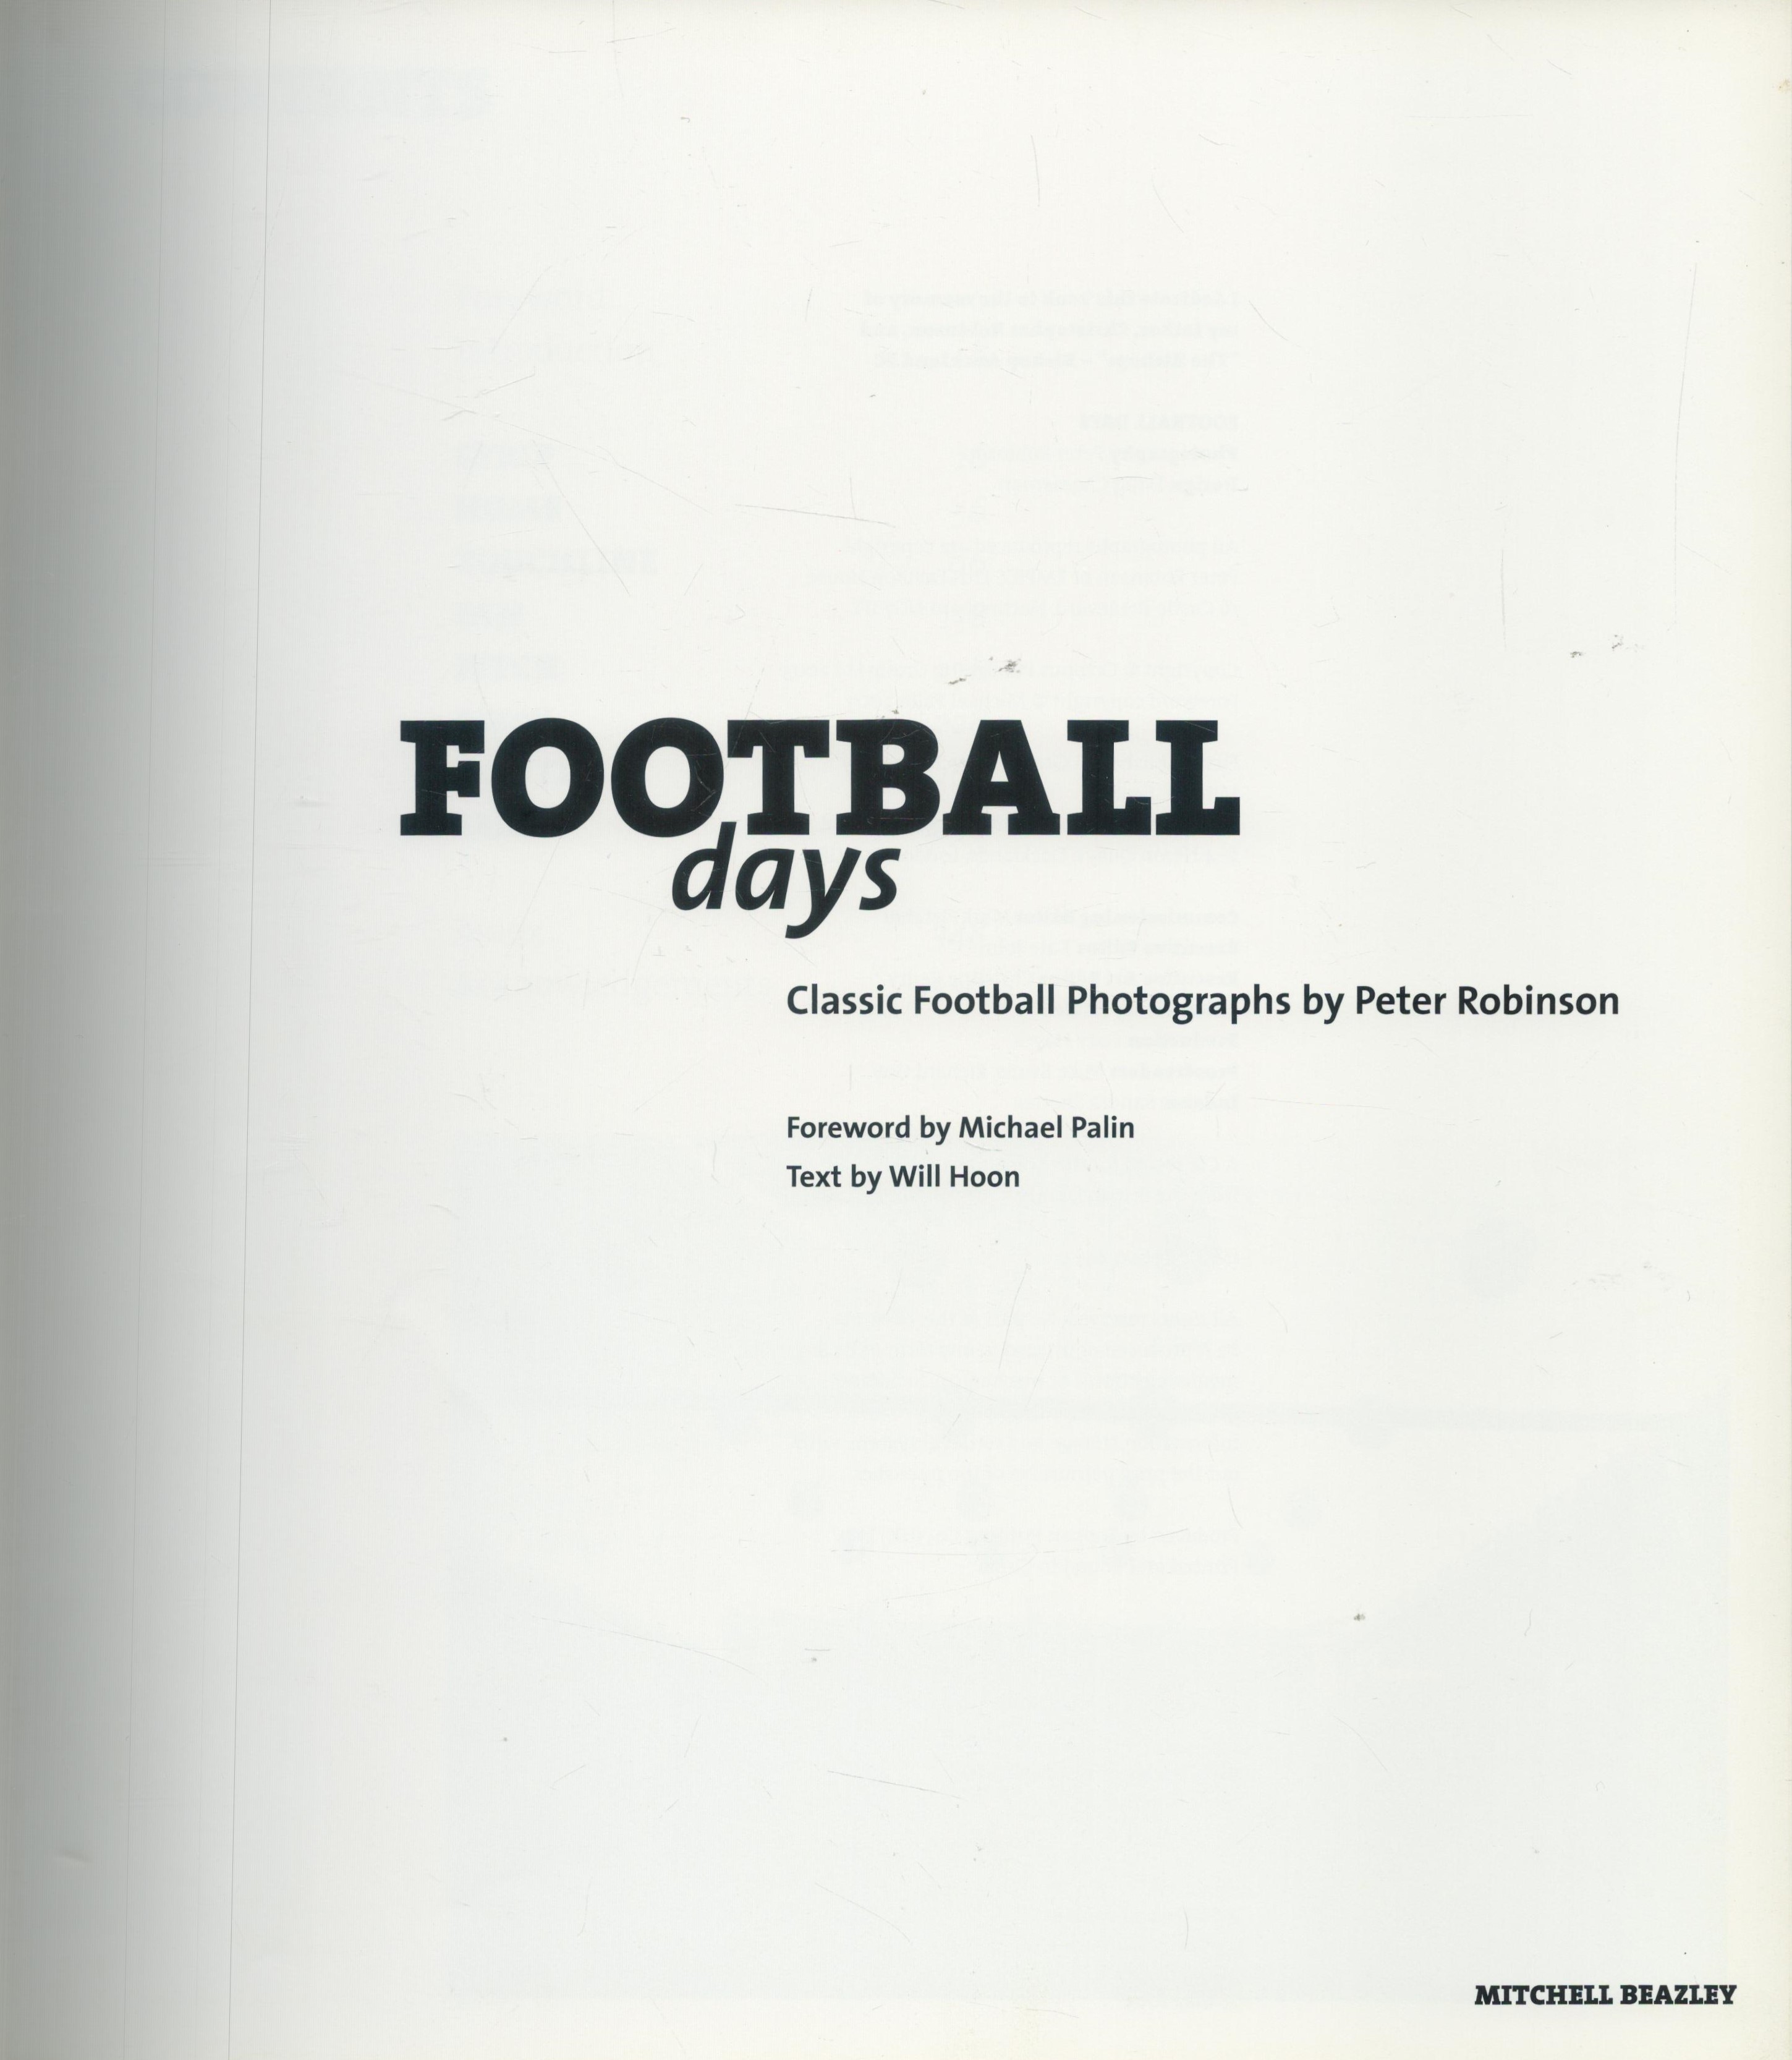 Football days, classic football photographs by Peter Robinson Hardback book, 352 pages. Good - Image 2 of 3